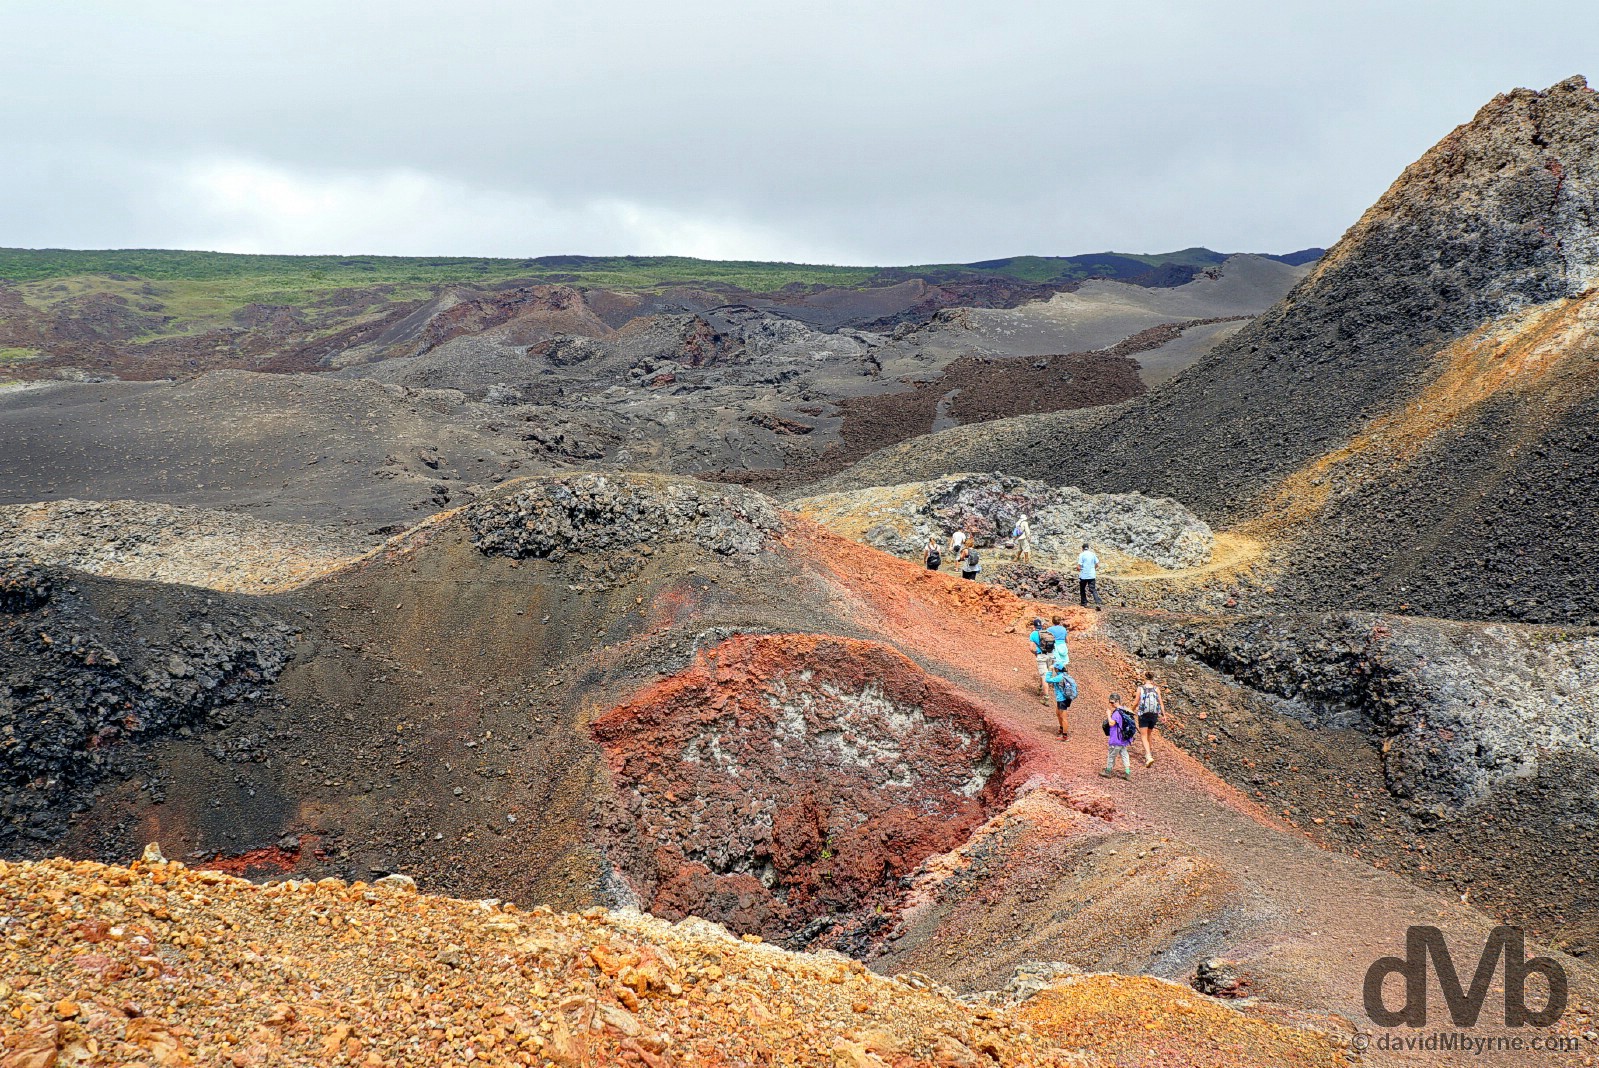 The volcanic landscape of Volcan Chico on Isla Isabela, Galapagos, Ecuador. July 20, 2015.